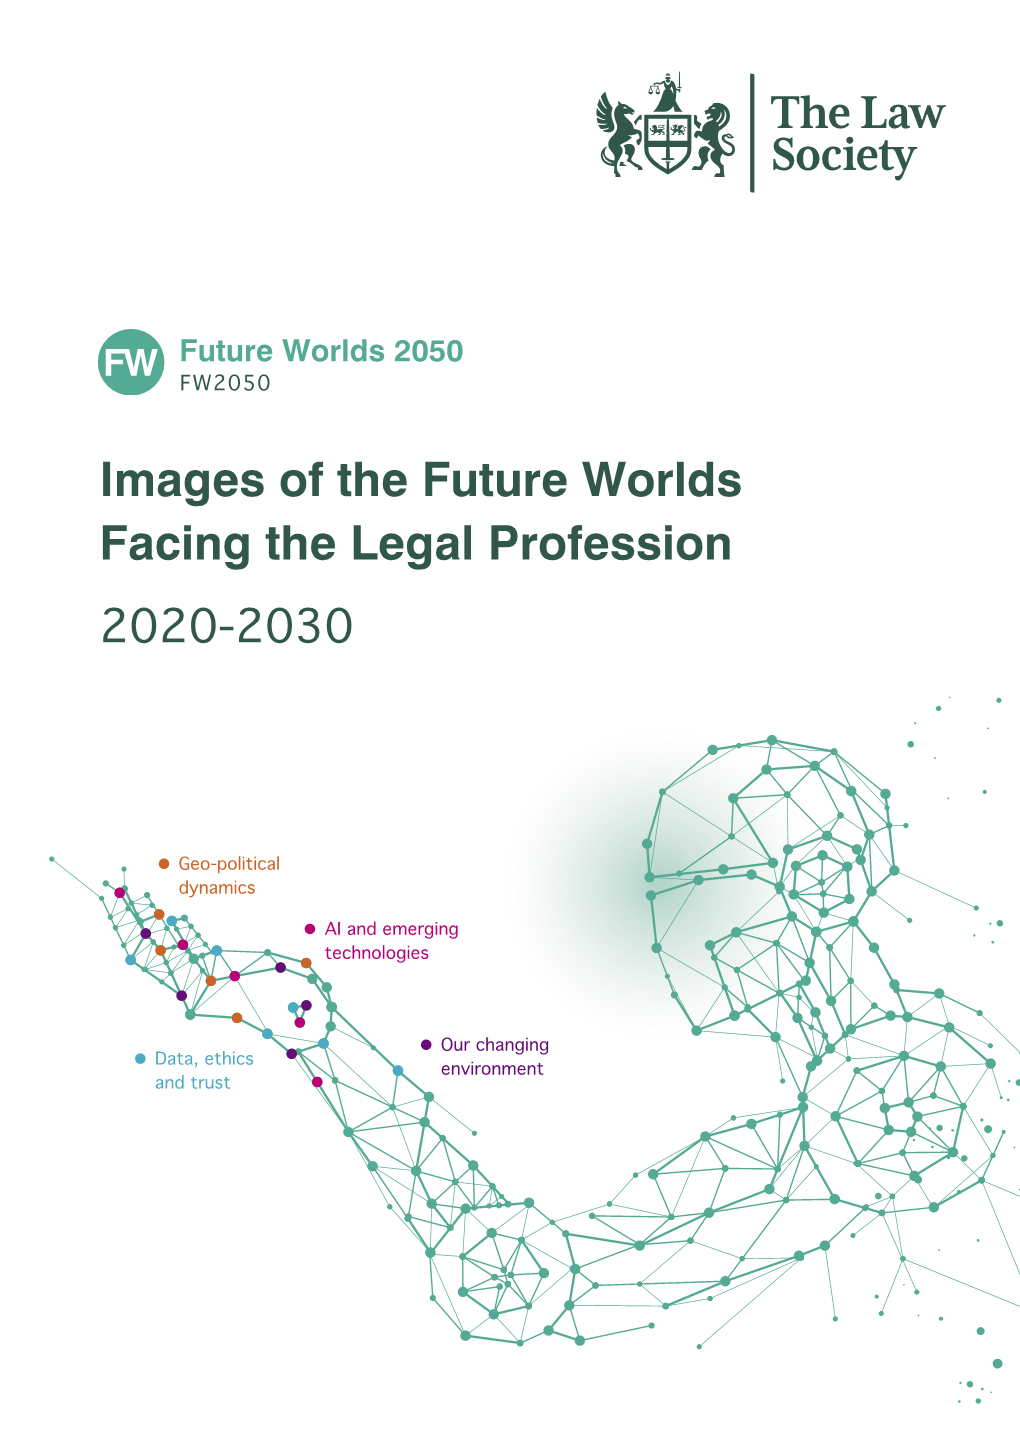 Law Society's Future Worlds 2050